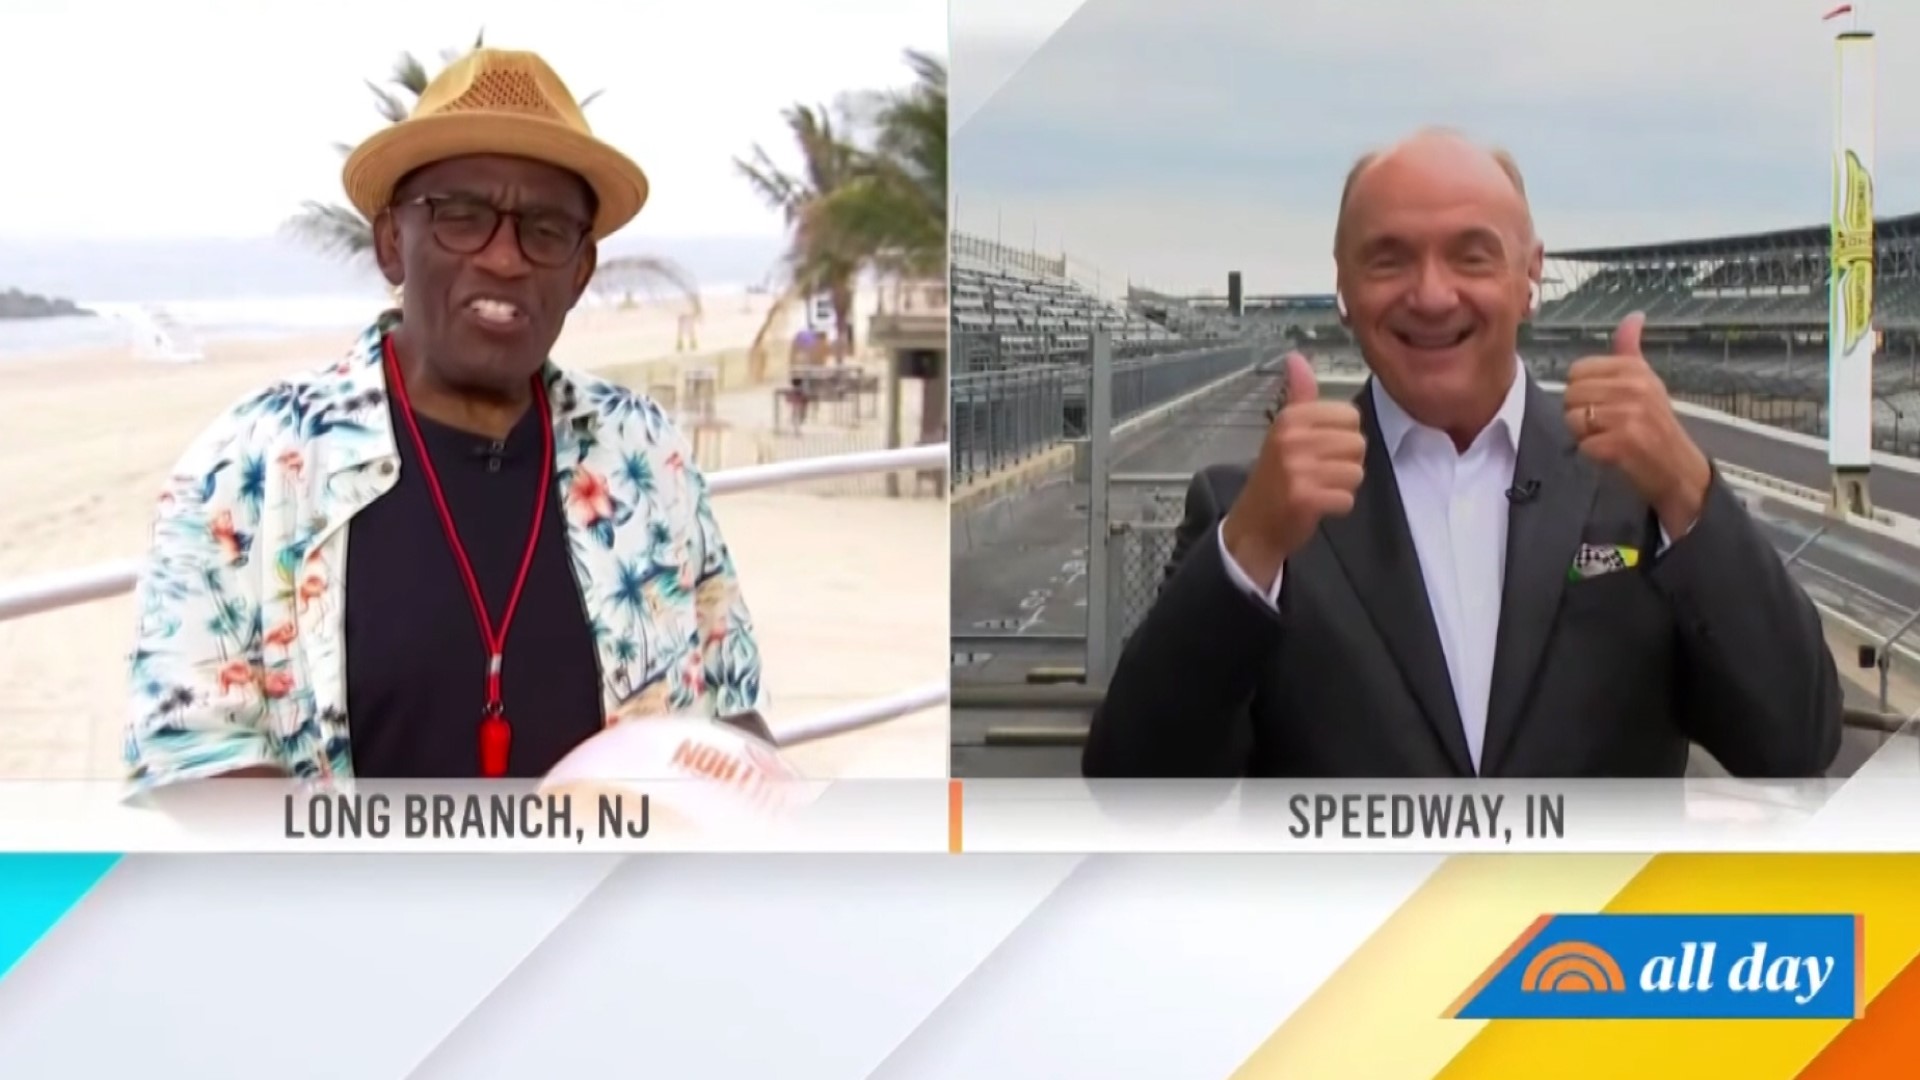 Over 60 NBC stations and colleges from across the country joined NBC's Al Roker from beaches, rooftops, stadiums, and race tracks.